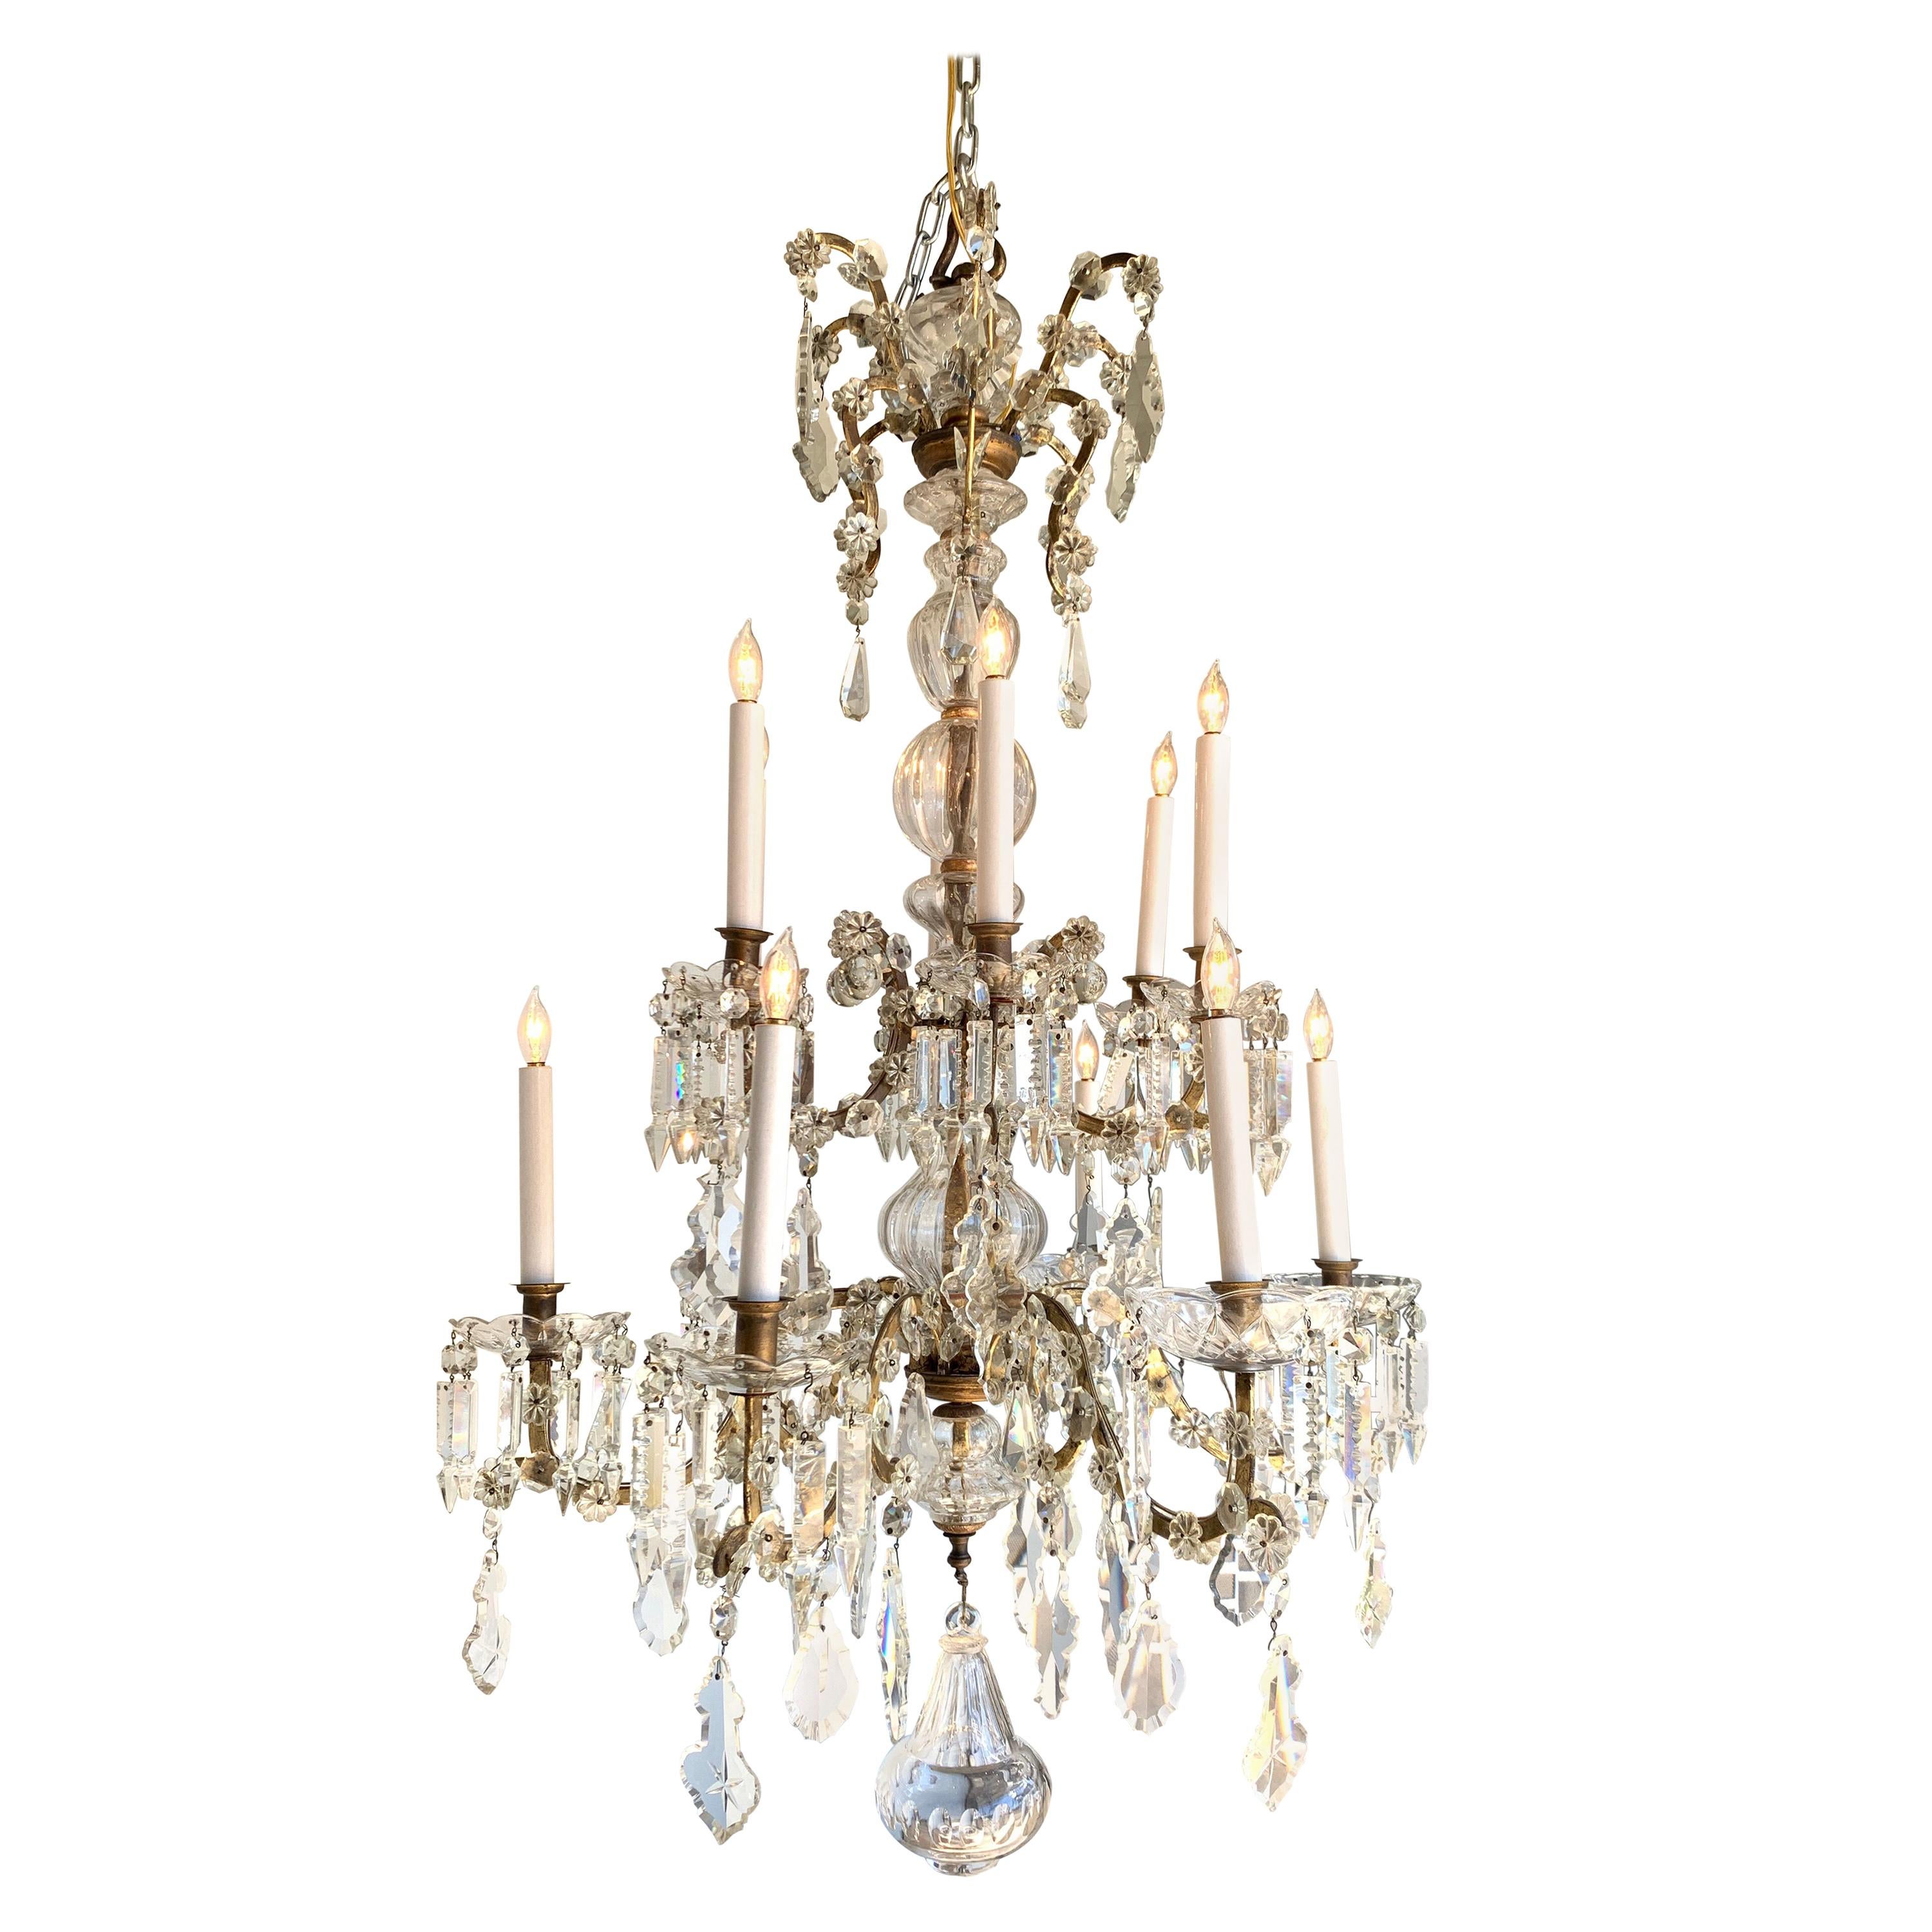 19th Century French 12-Light Crystal Chandelier